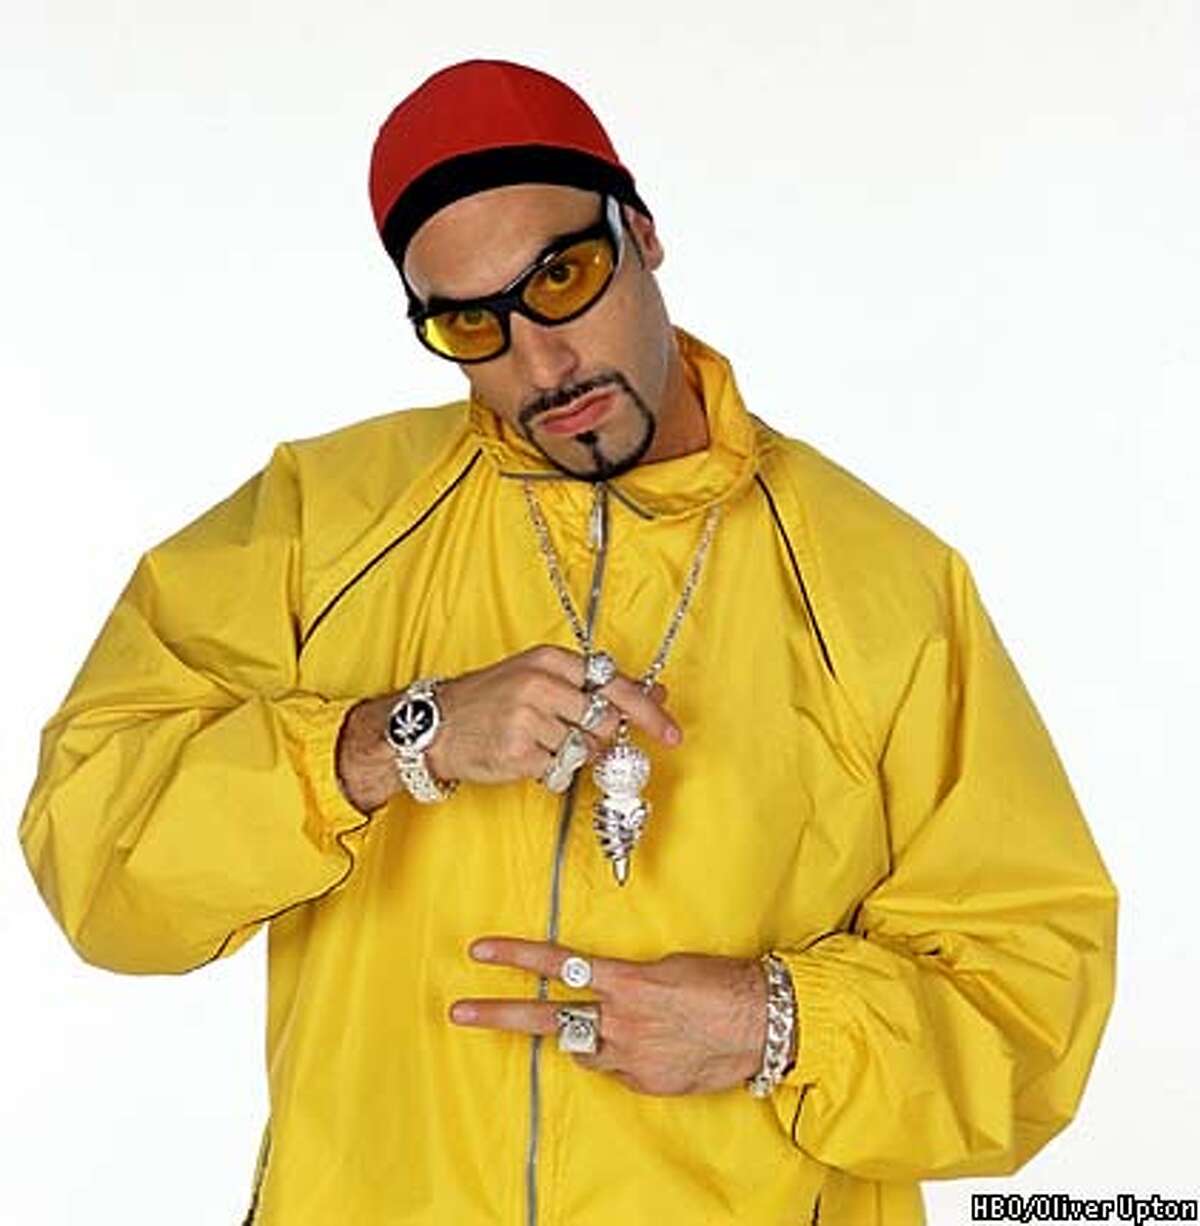 Da Ali G' funny, but not great HBO kind of funny